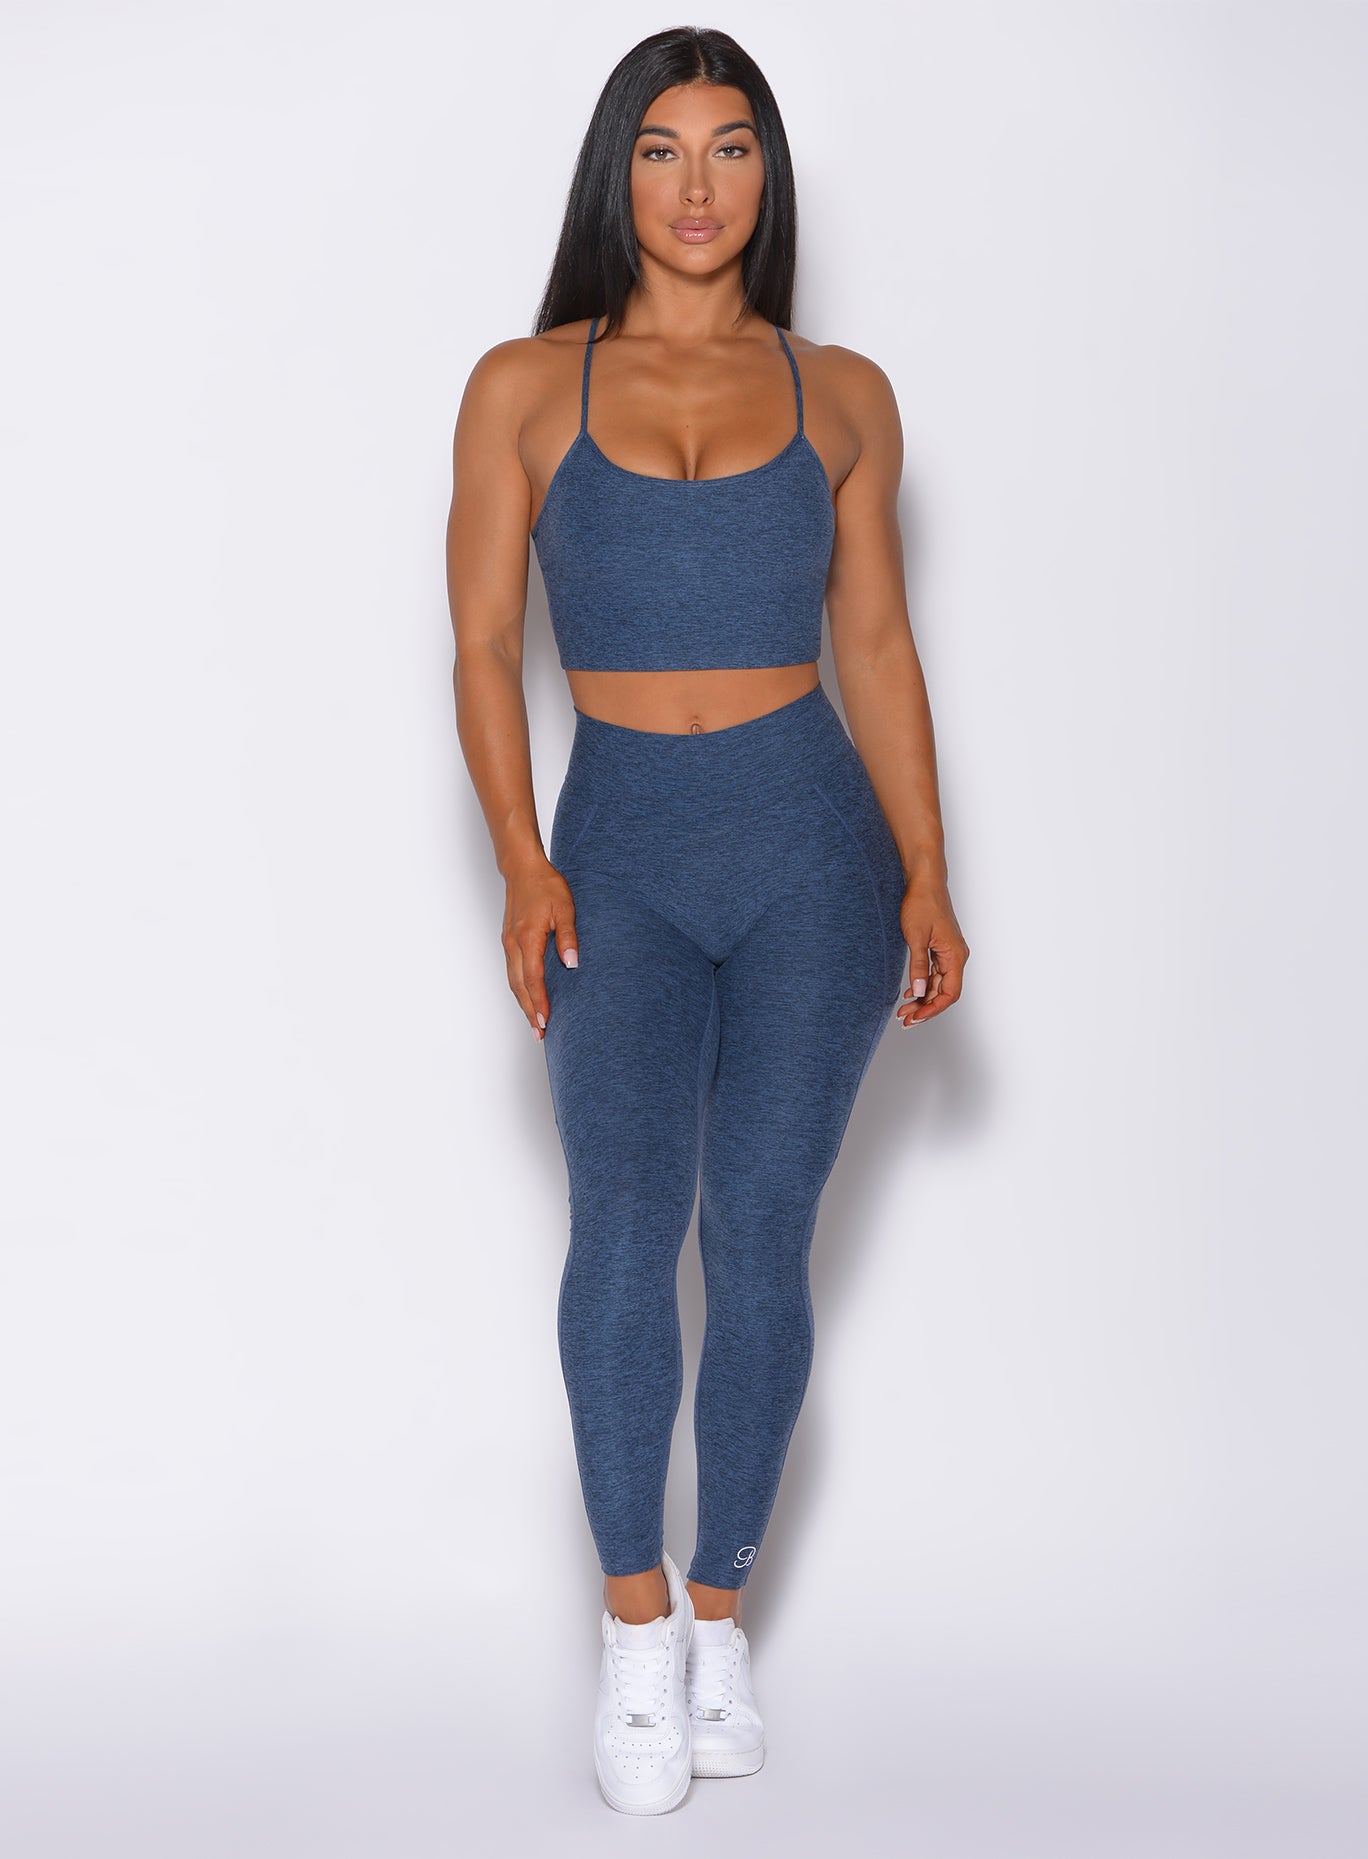 Front profile view of a model in our uplift pocket leggings in night sky color and a matching bra